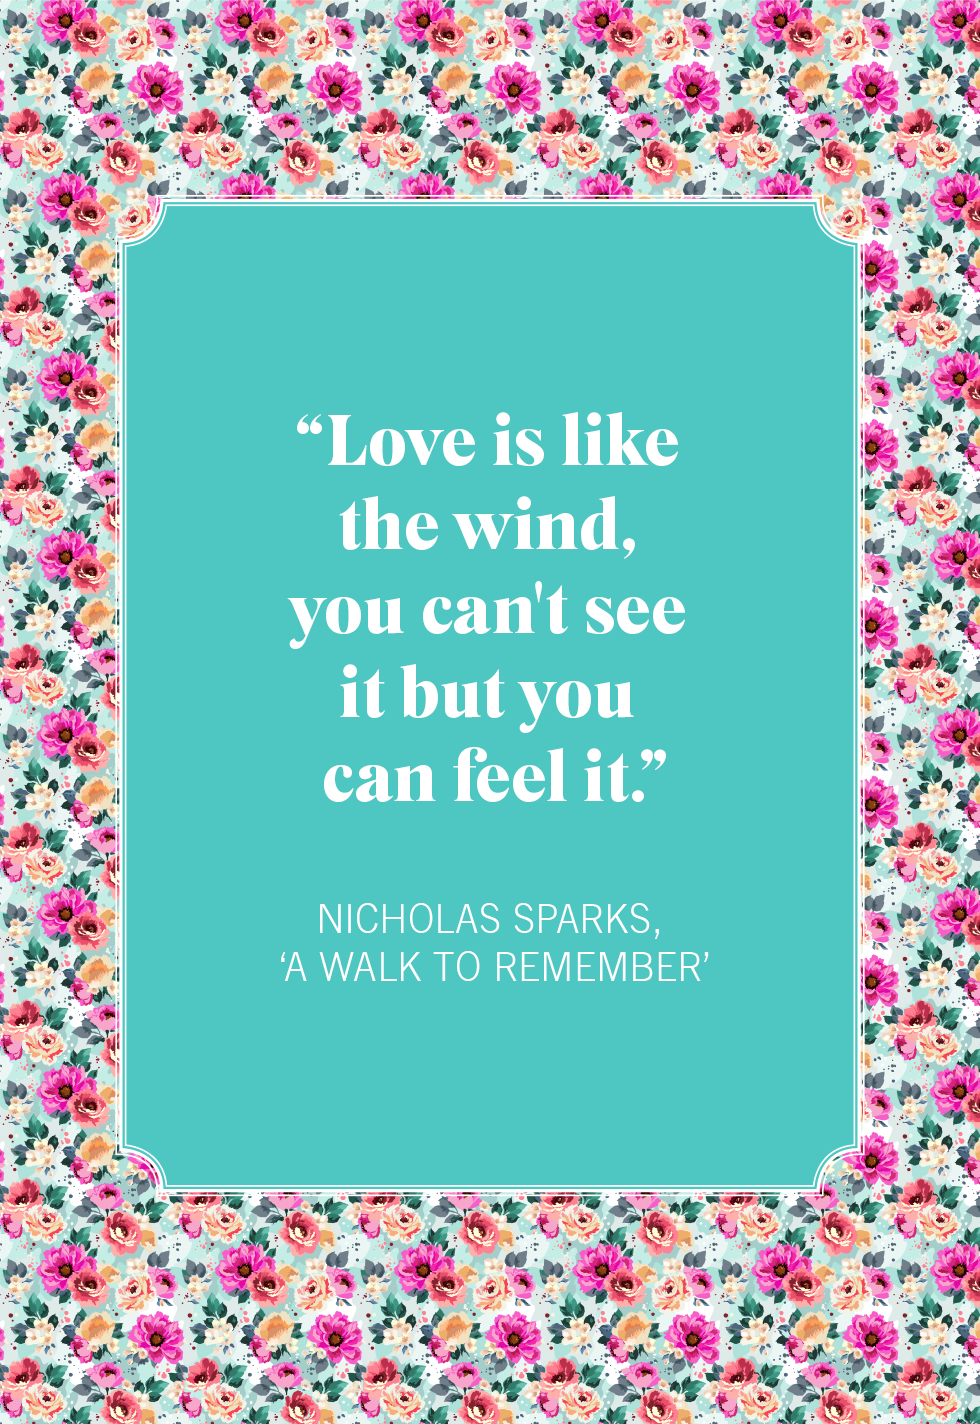 Love is like the wind. You can't see it, but you can feel it